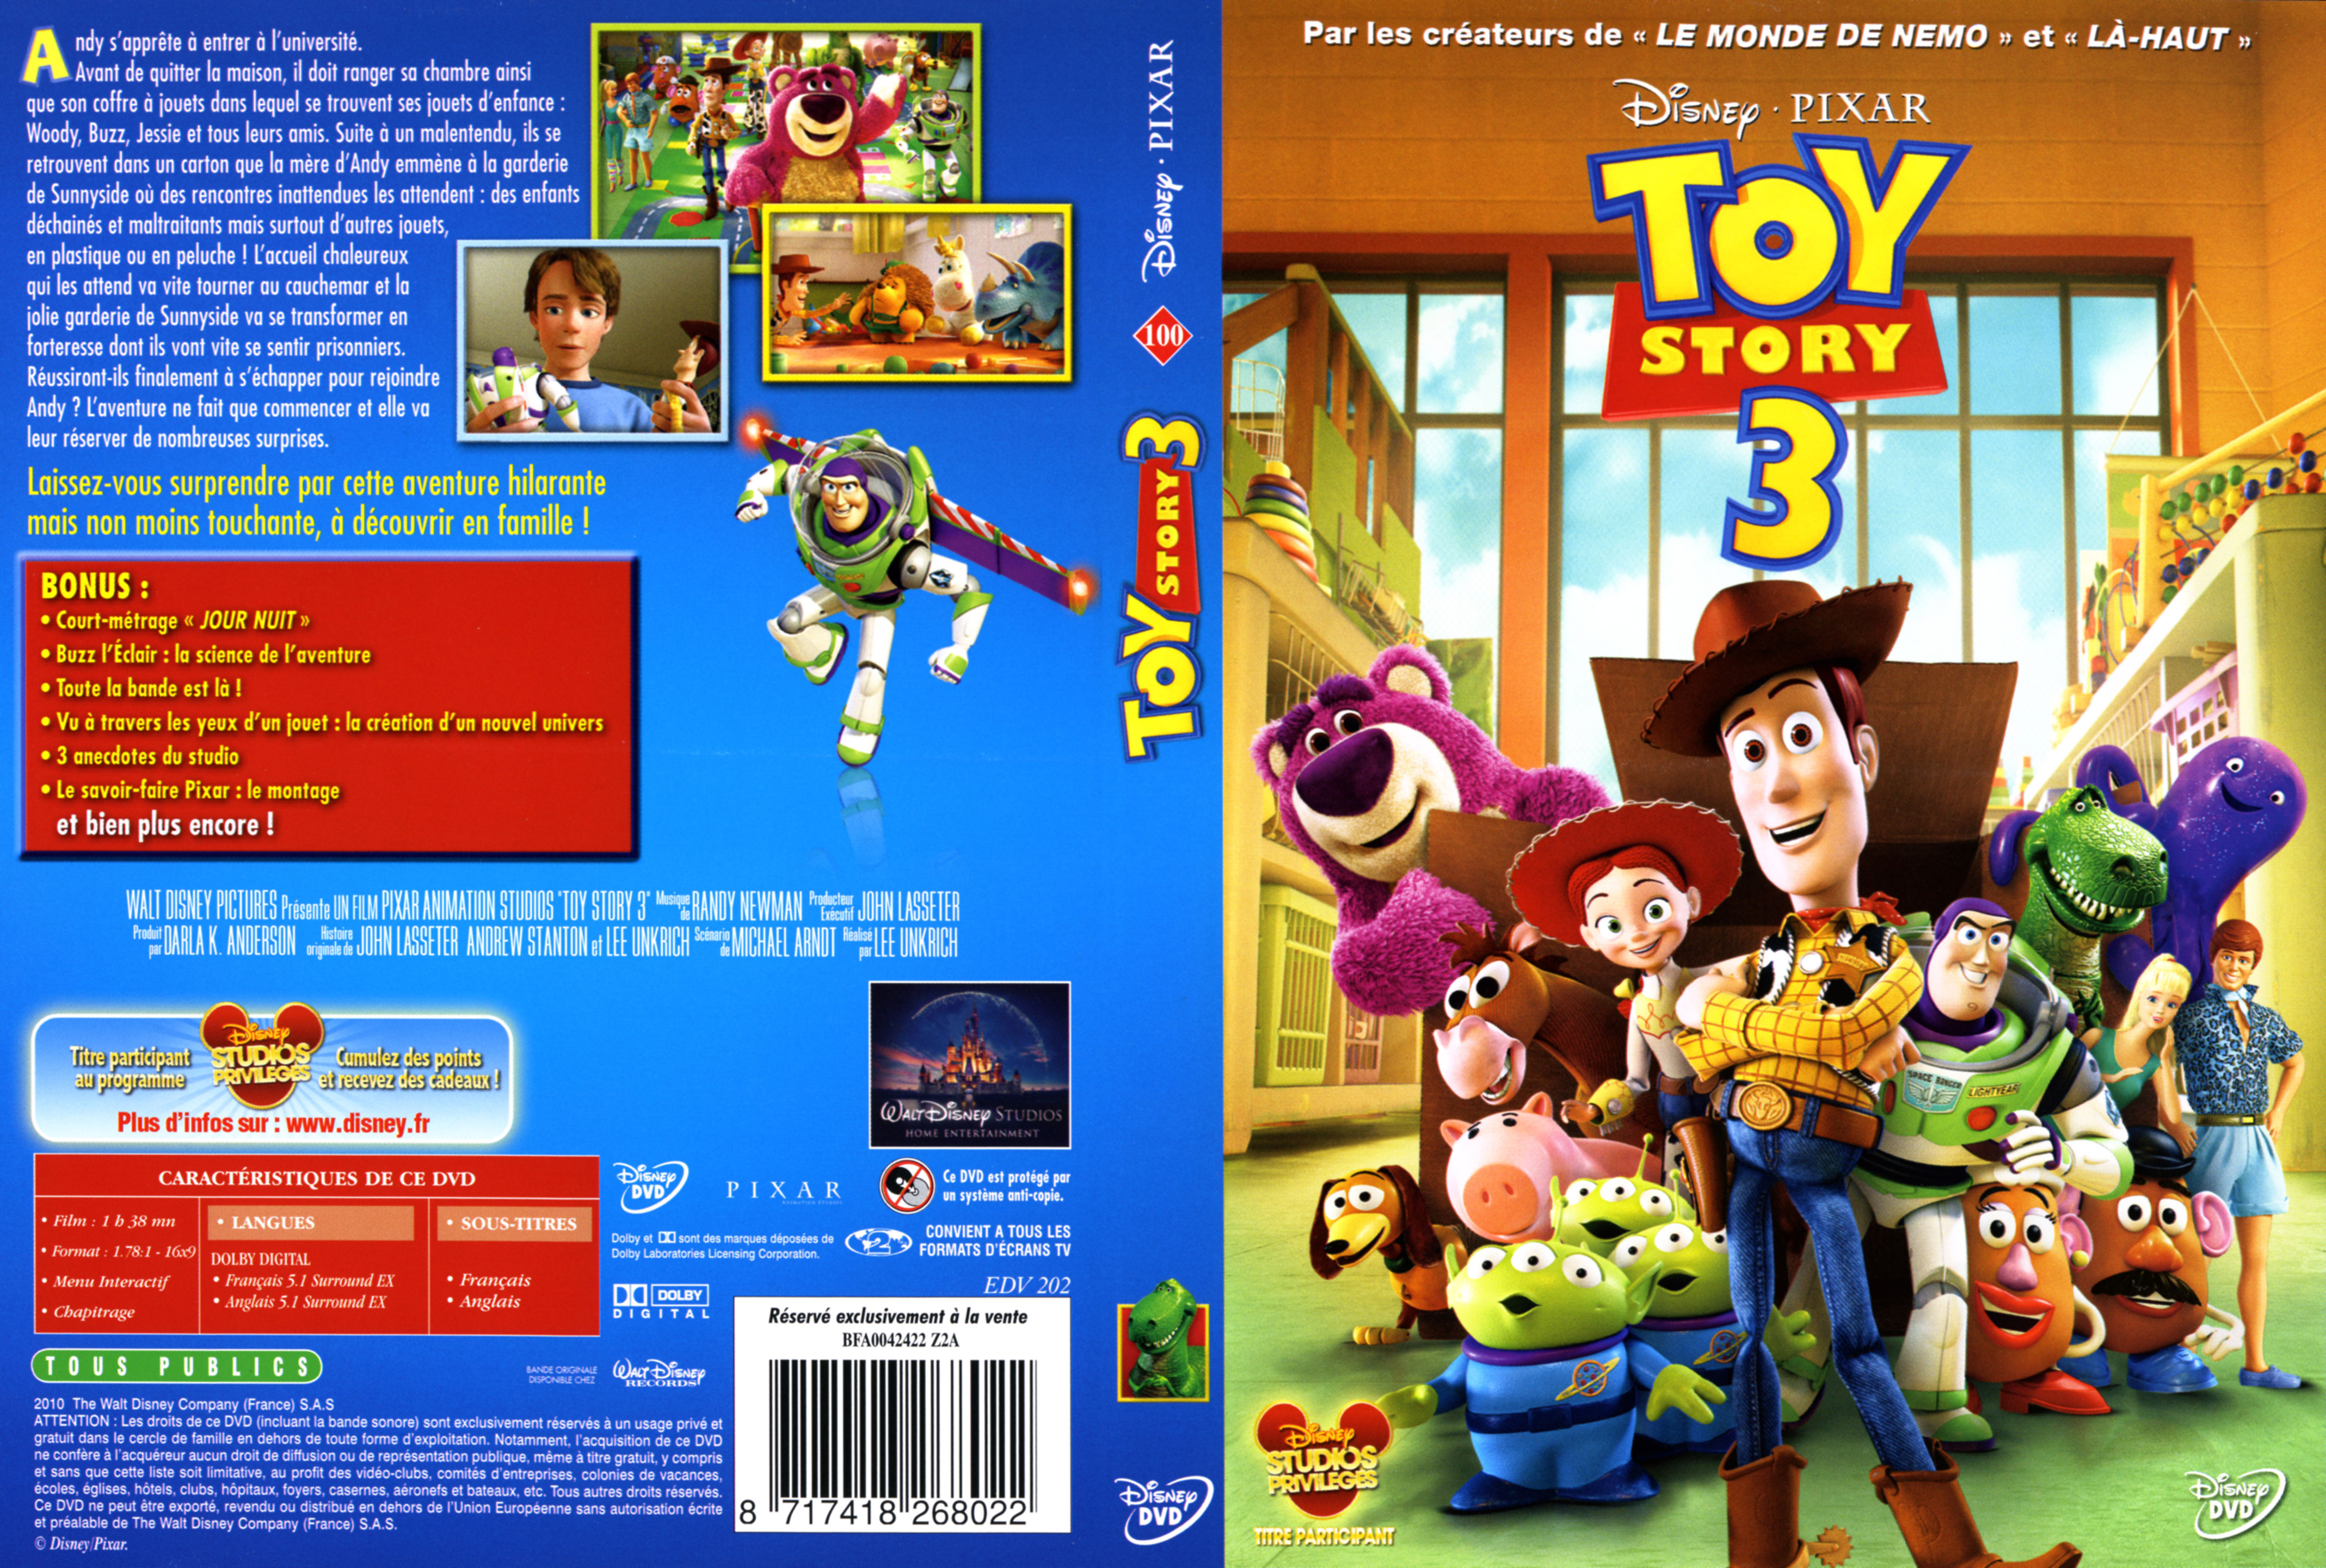 Jaquette DVD Toy story 3